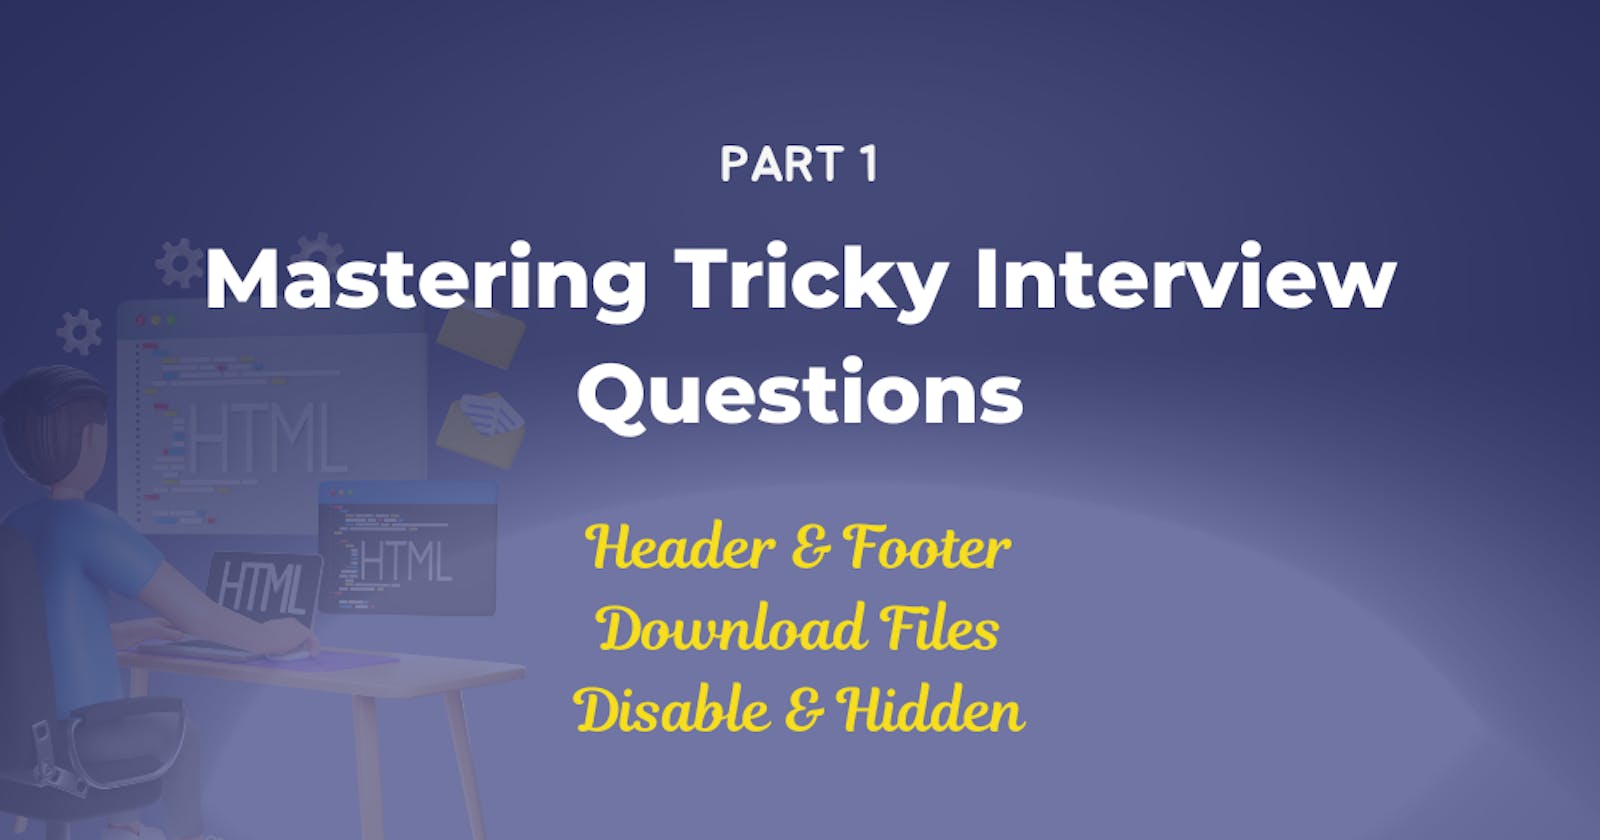 Mastering HTML Tricky Interview Questions - Part 1: Download File, Autocomplete, and header & Footer